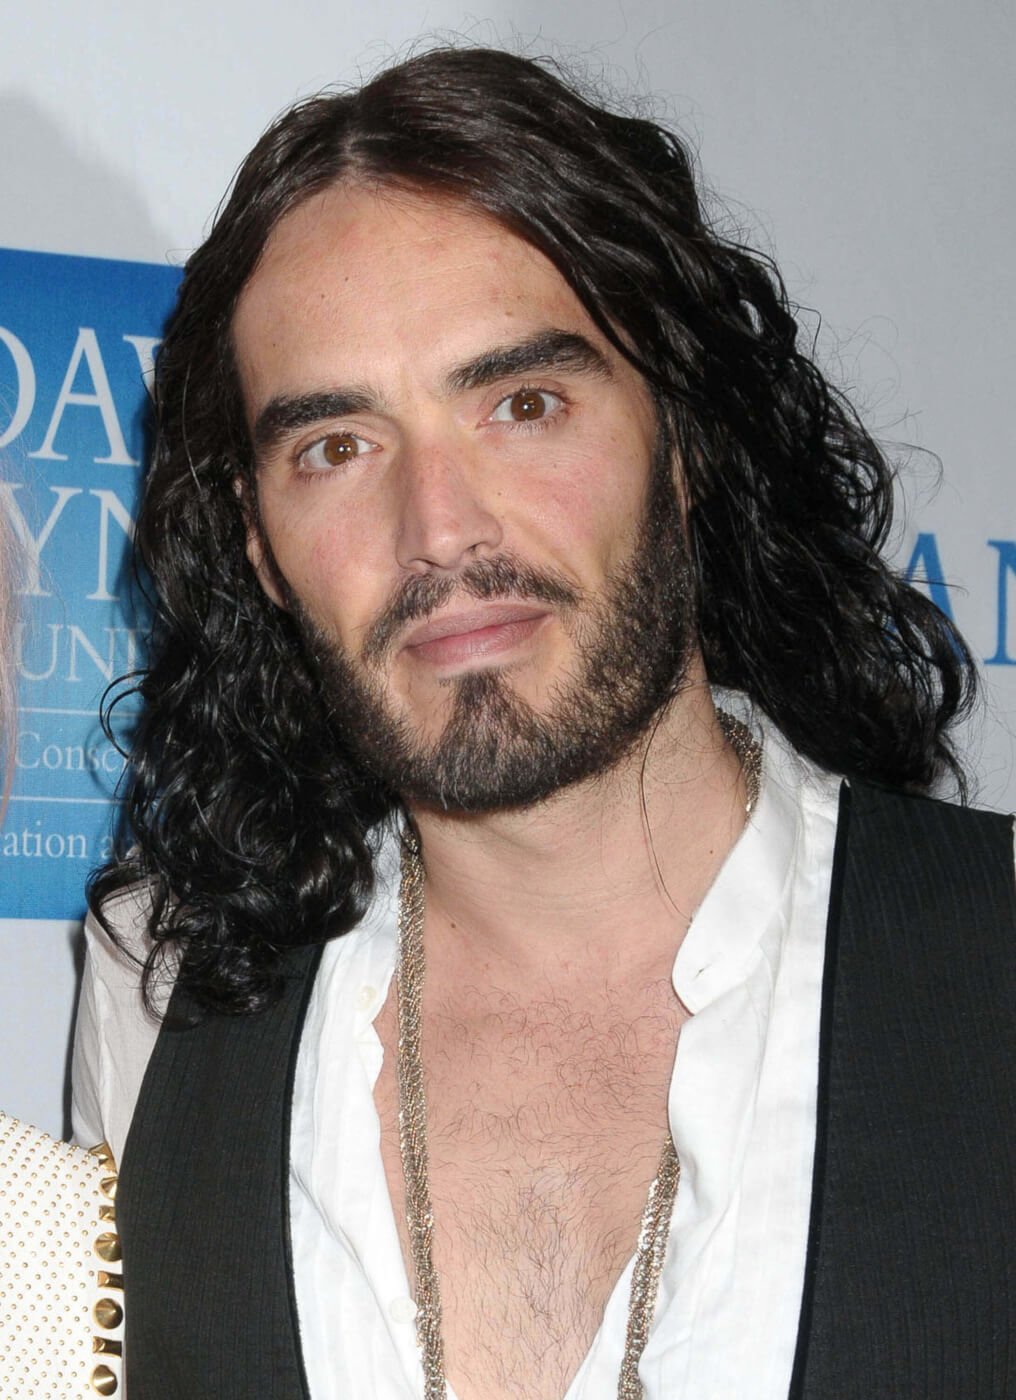 Russell Brand's Beef with So-Called 